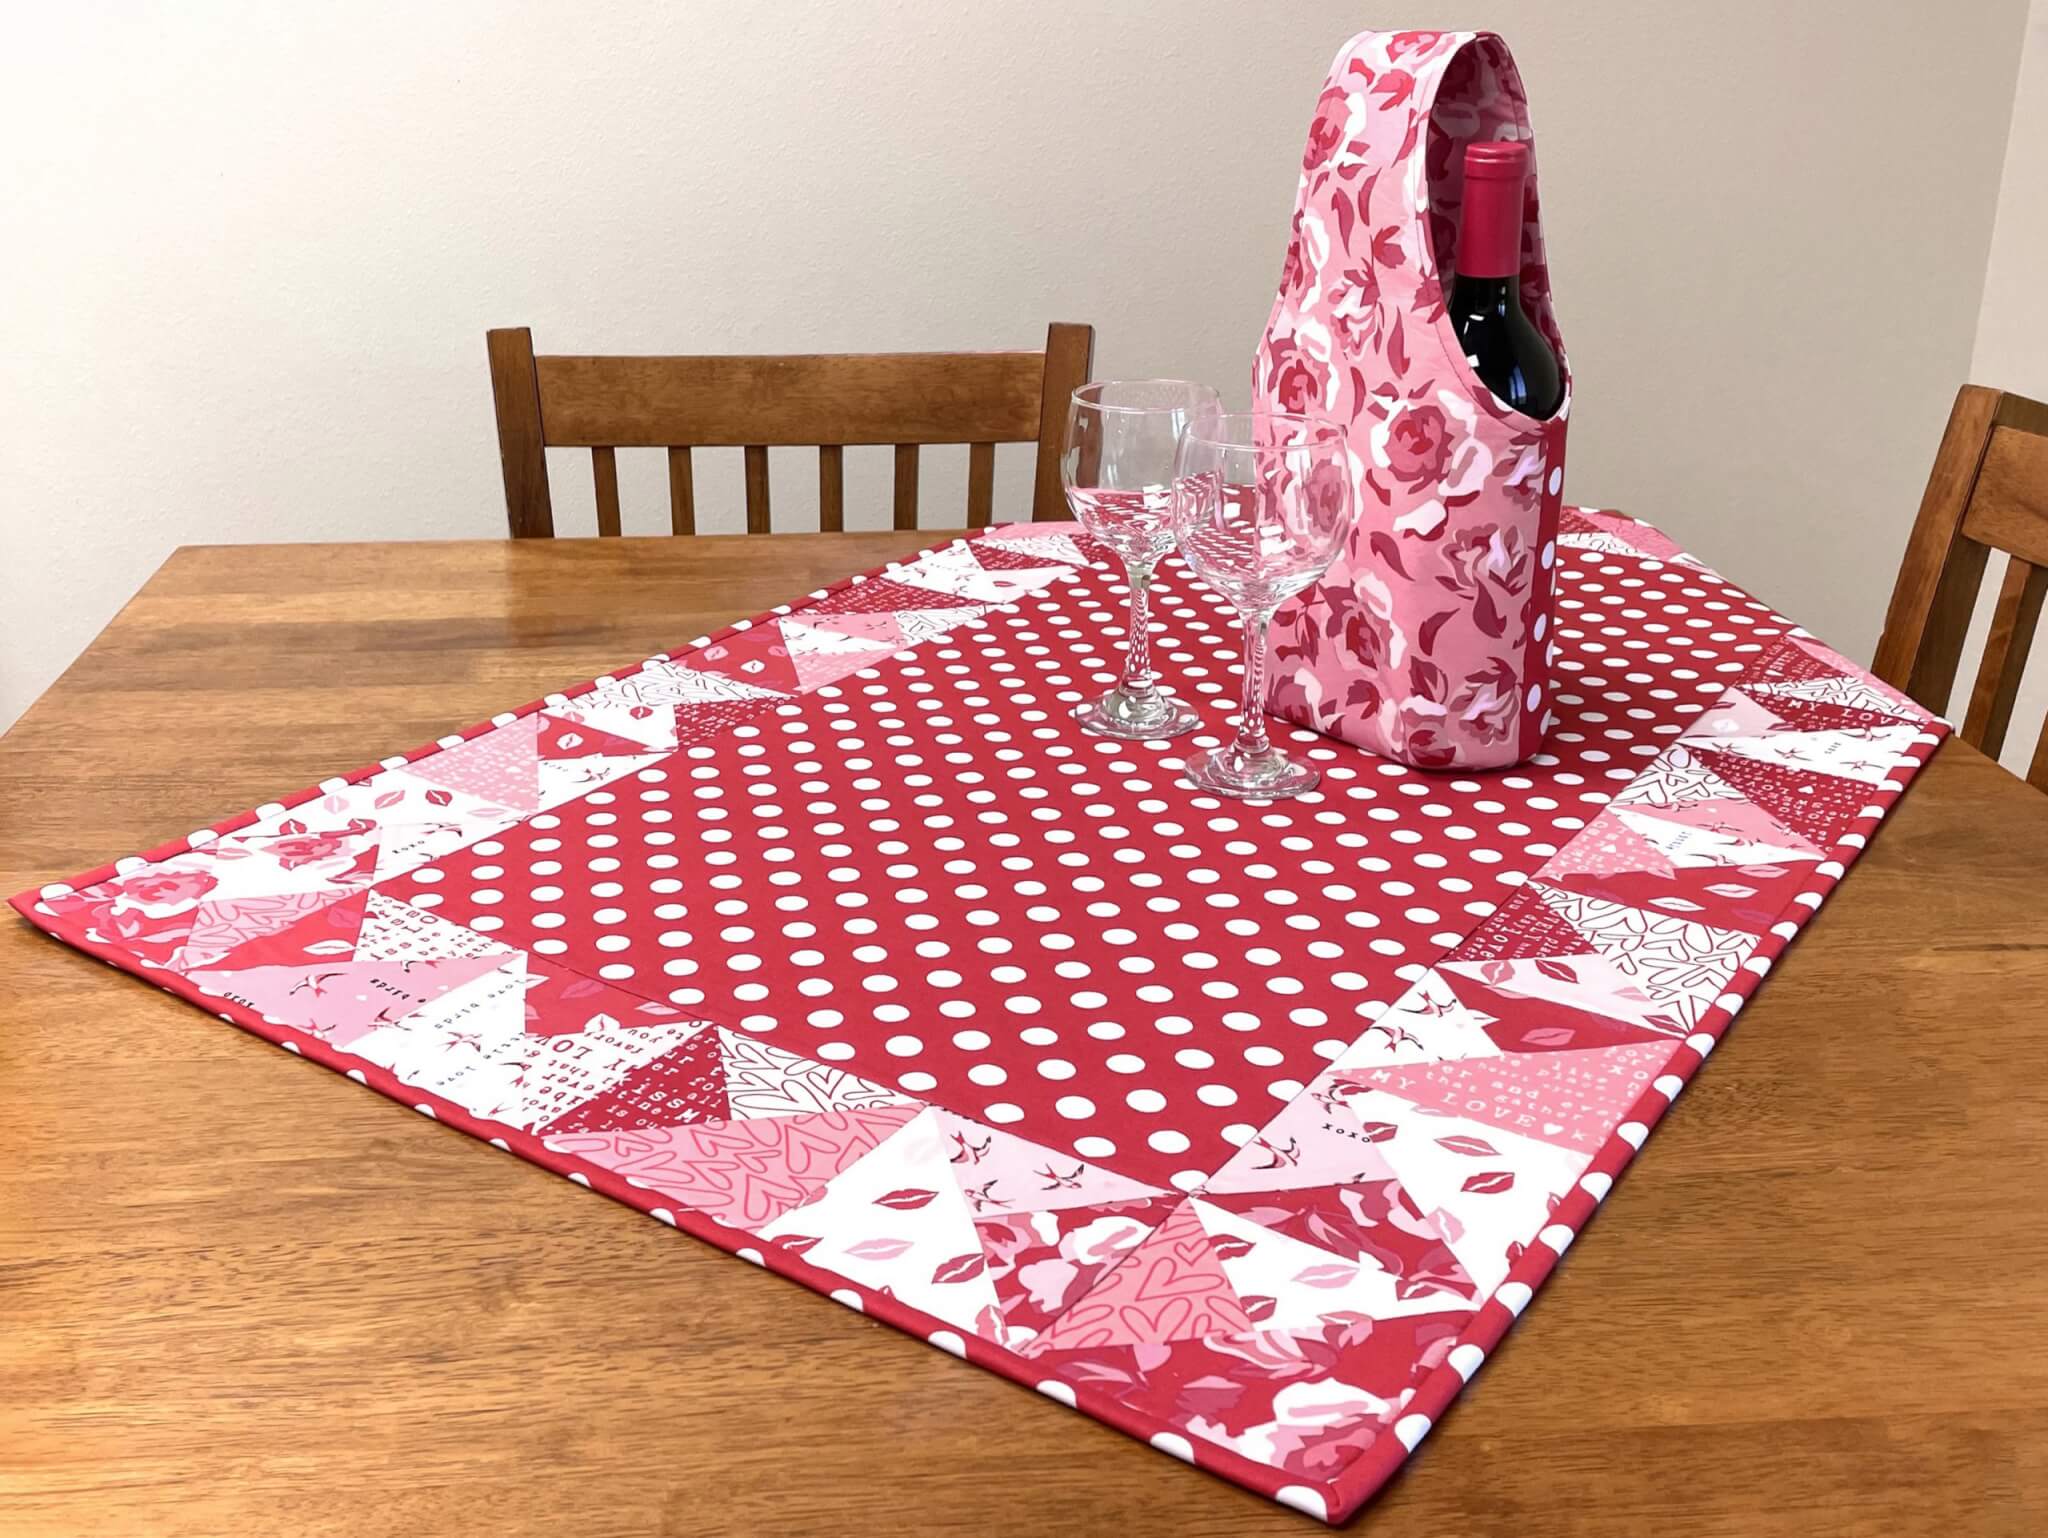 Sew A Celebration: Valentine Love Letters Modified Quarter-Square Table Runner Sewing Tutorial by the Stitch it! Sisters at The Nancy Zieman Blog